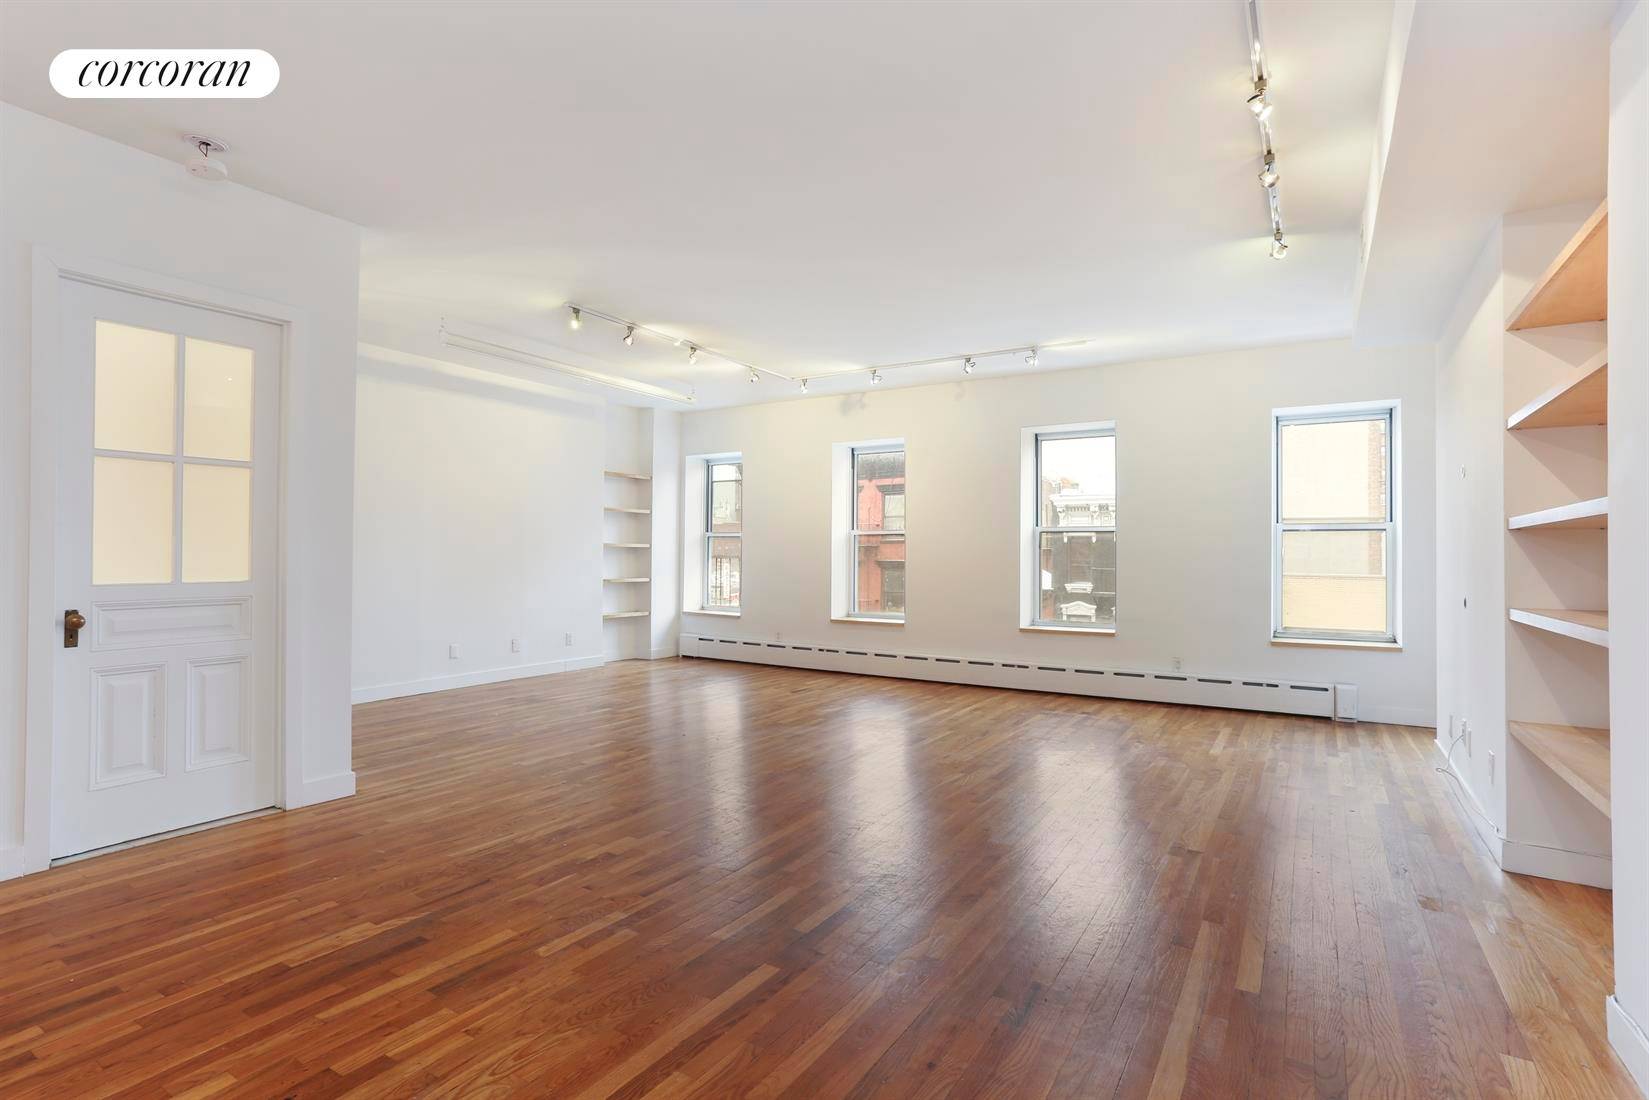 Rare, East Village condo at 240 East Houston Street measuring 1, 100 square feet of open loft space.